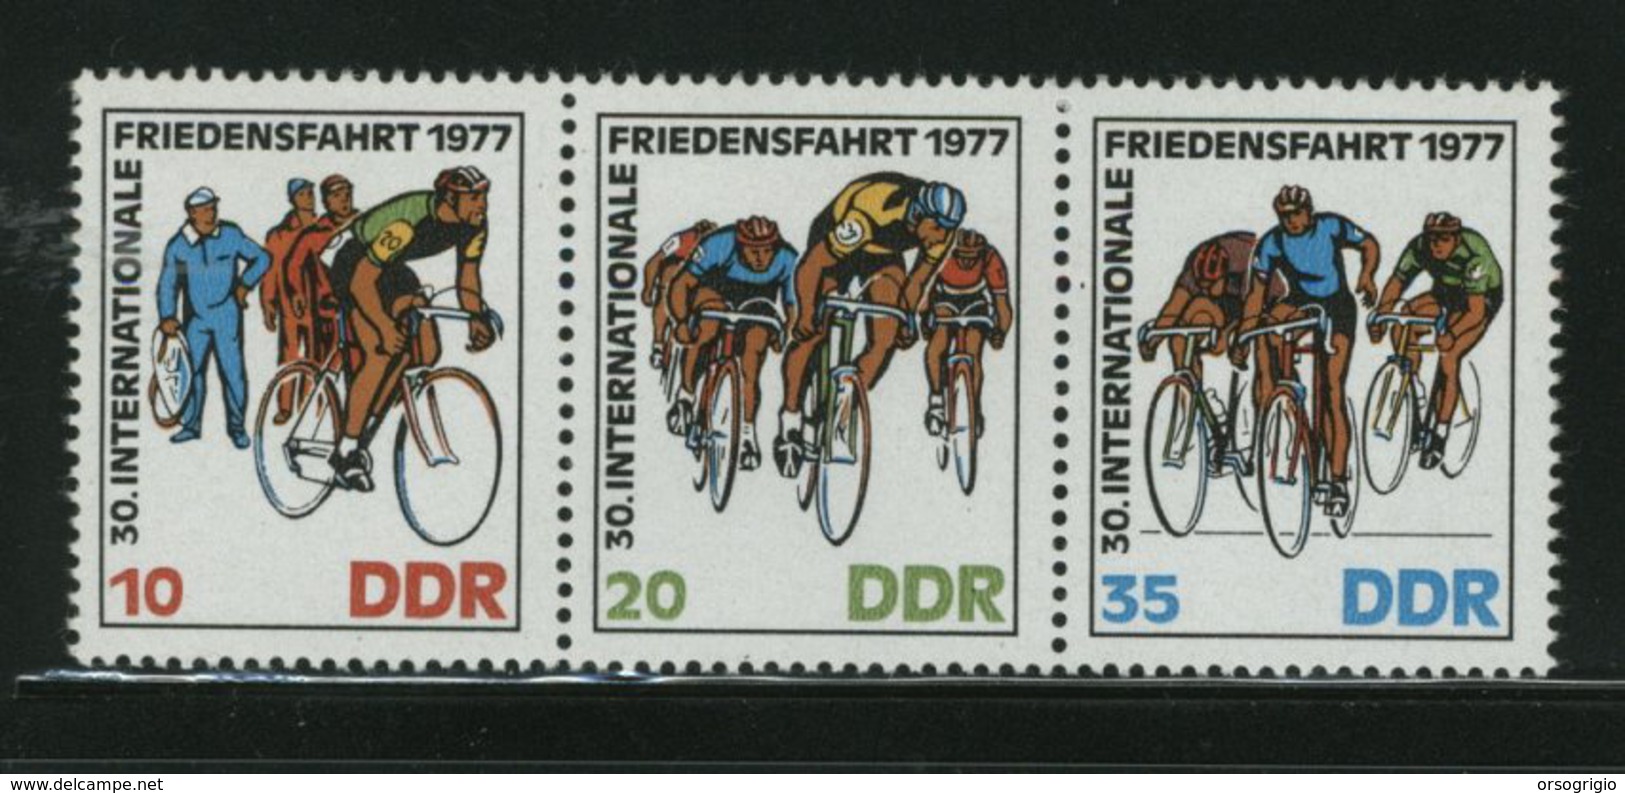 GERMANY DDR - VELO - CYCLE - BICICLETTA PORTAPACCHI - Ciclismo